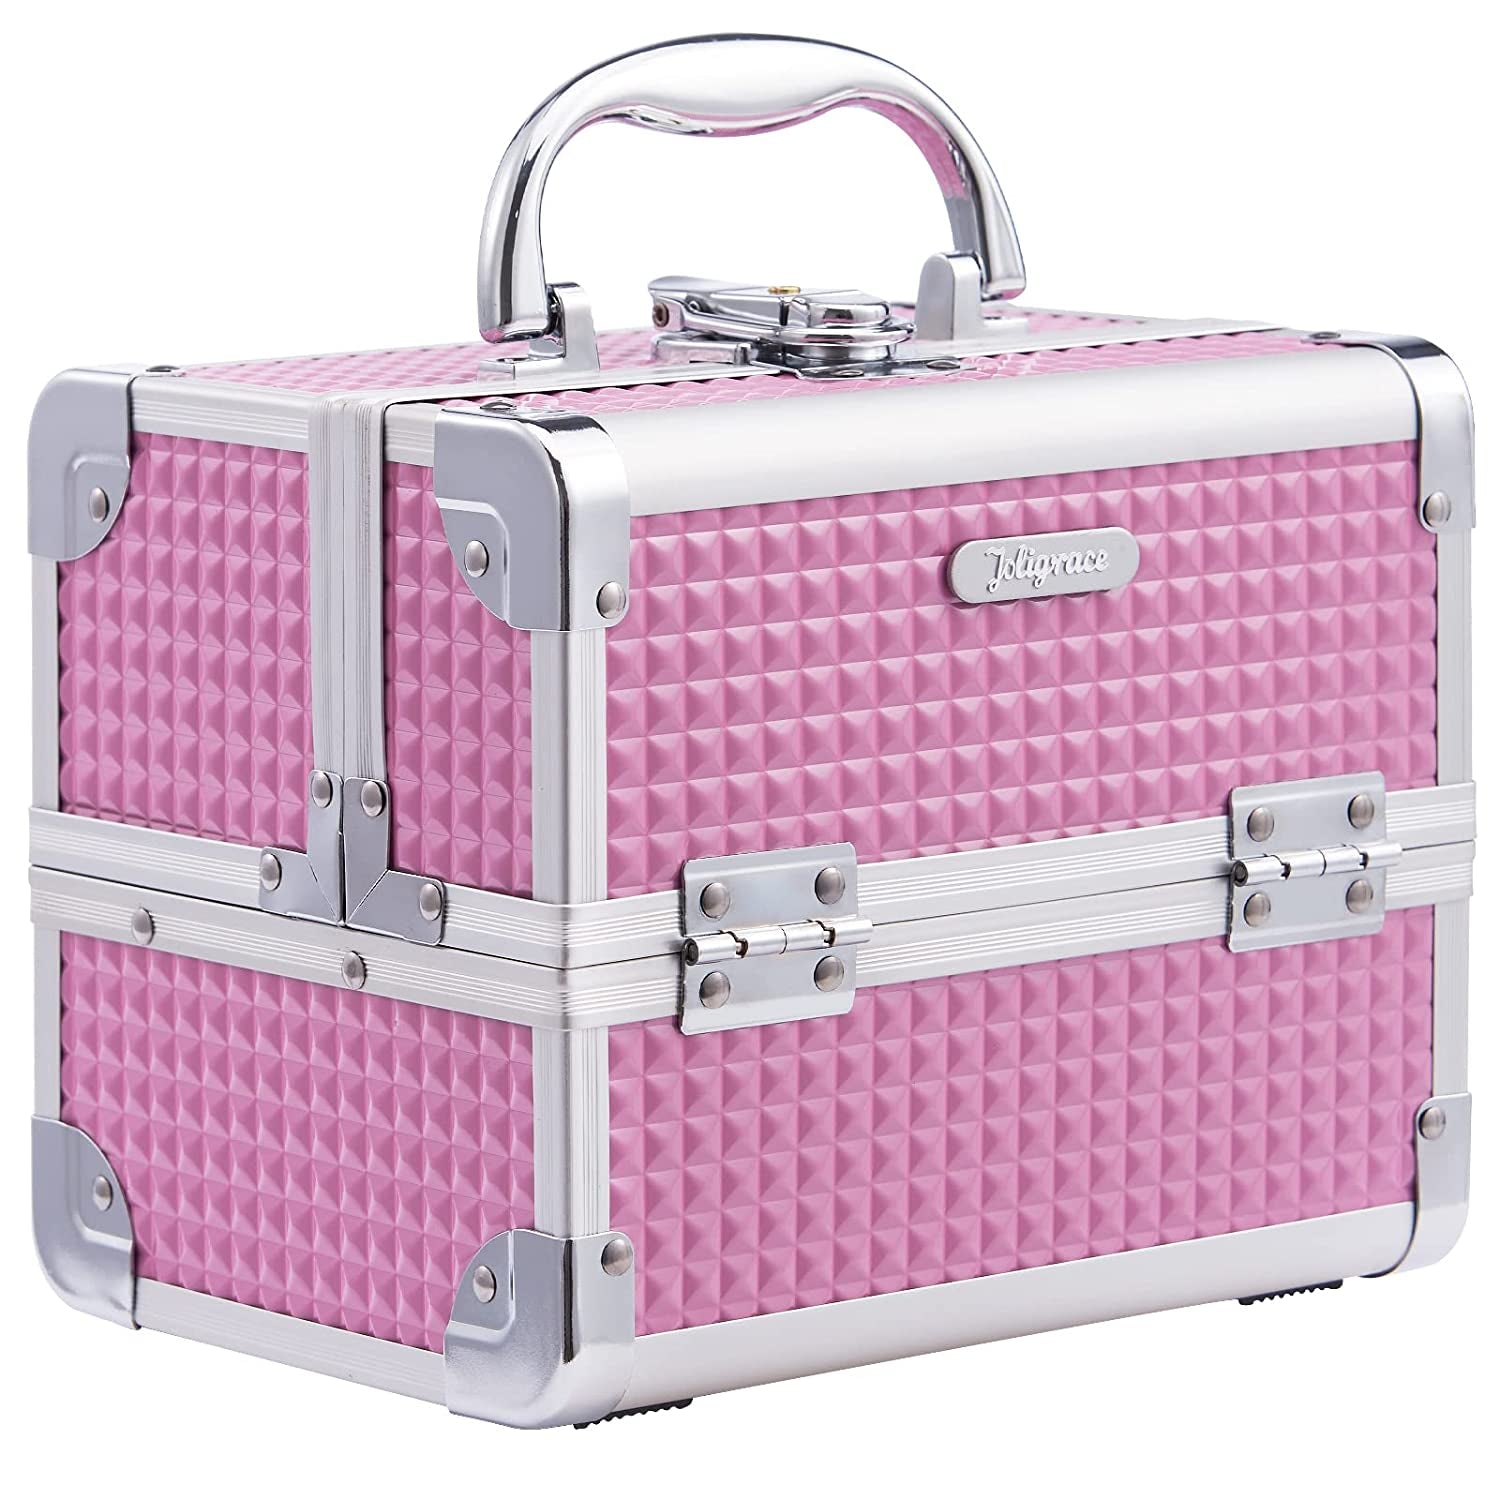 Joligrace Makeup Train Case Portable Cosmetic Box Jewelry Organizer Lockable with Keys and Mirror 2-Tier Trays Carrying with Handle Makeup Storage Box - Pink